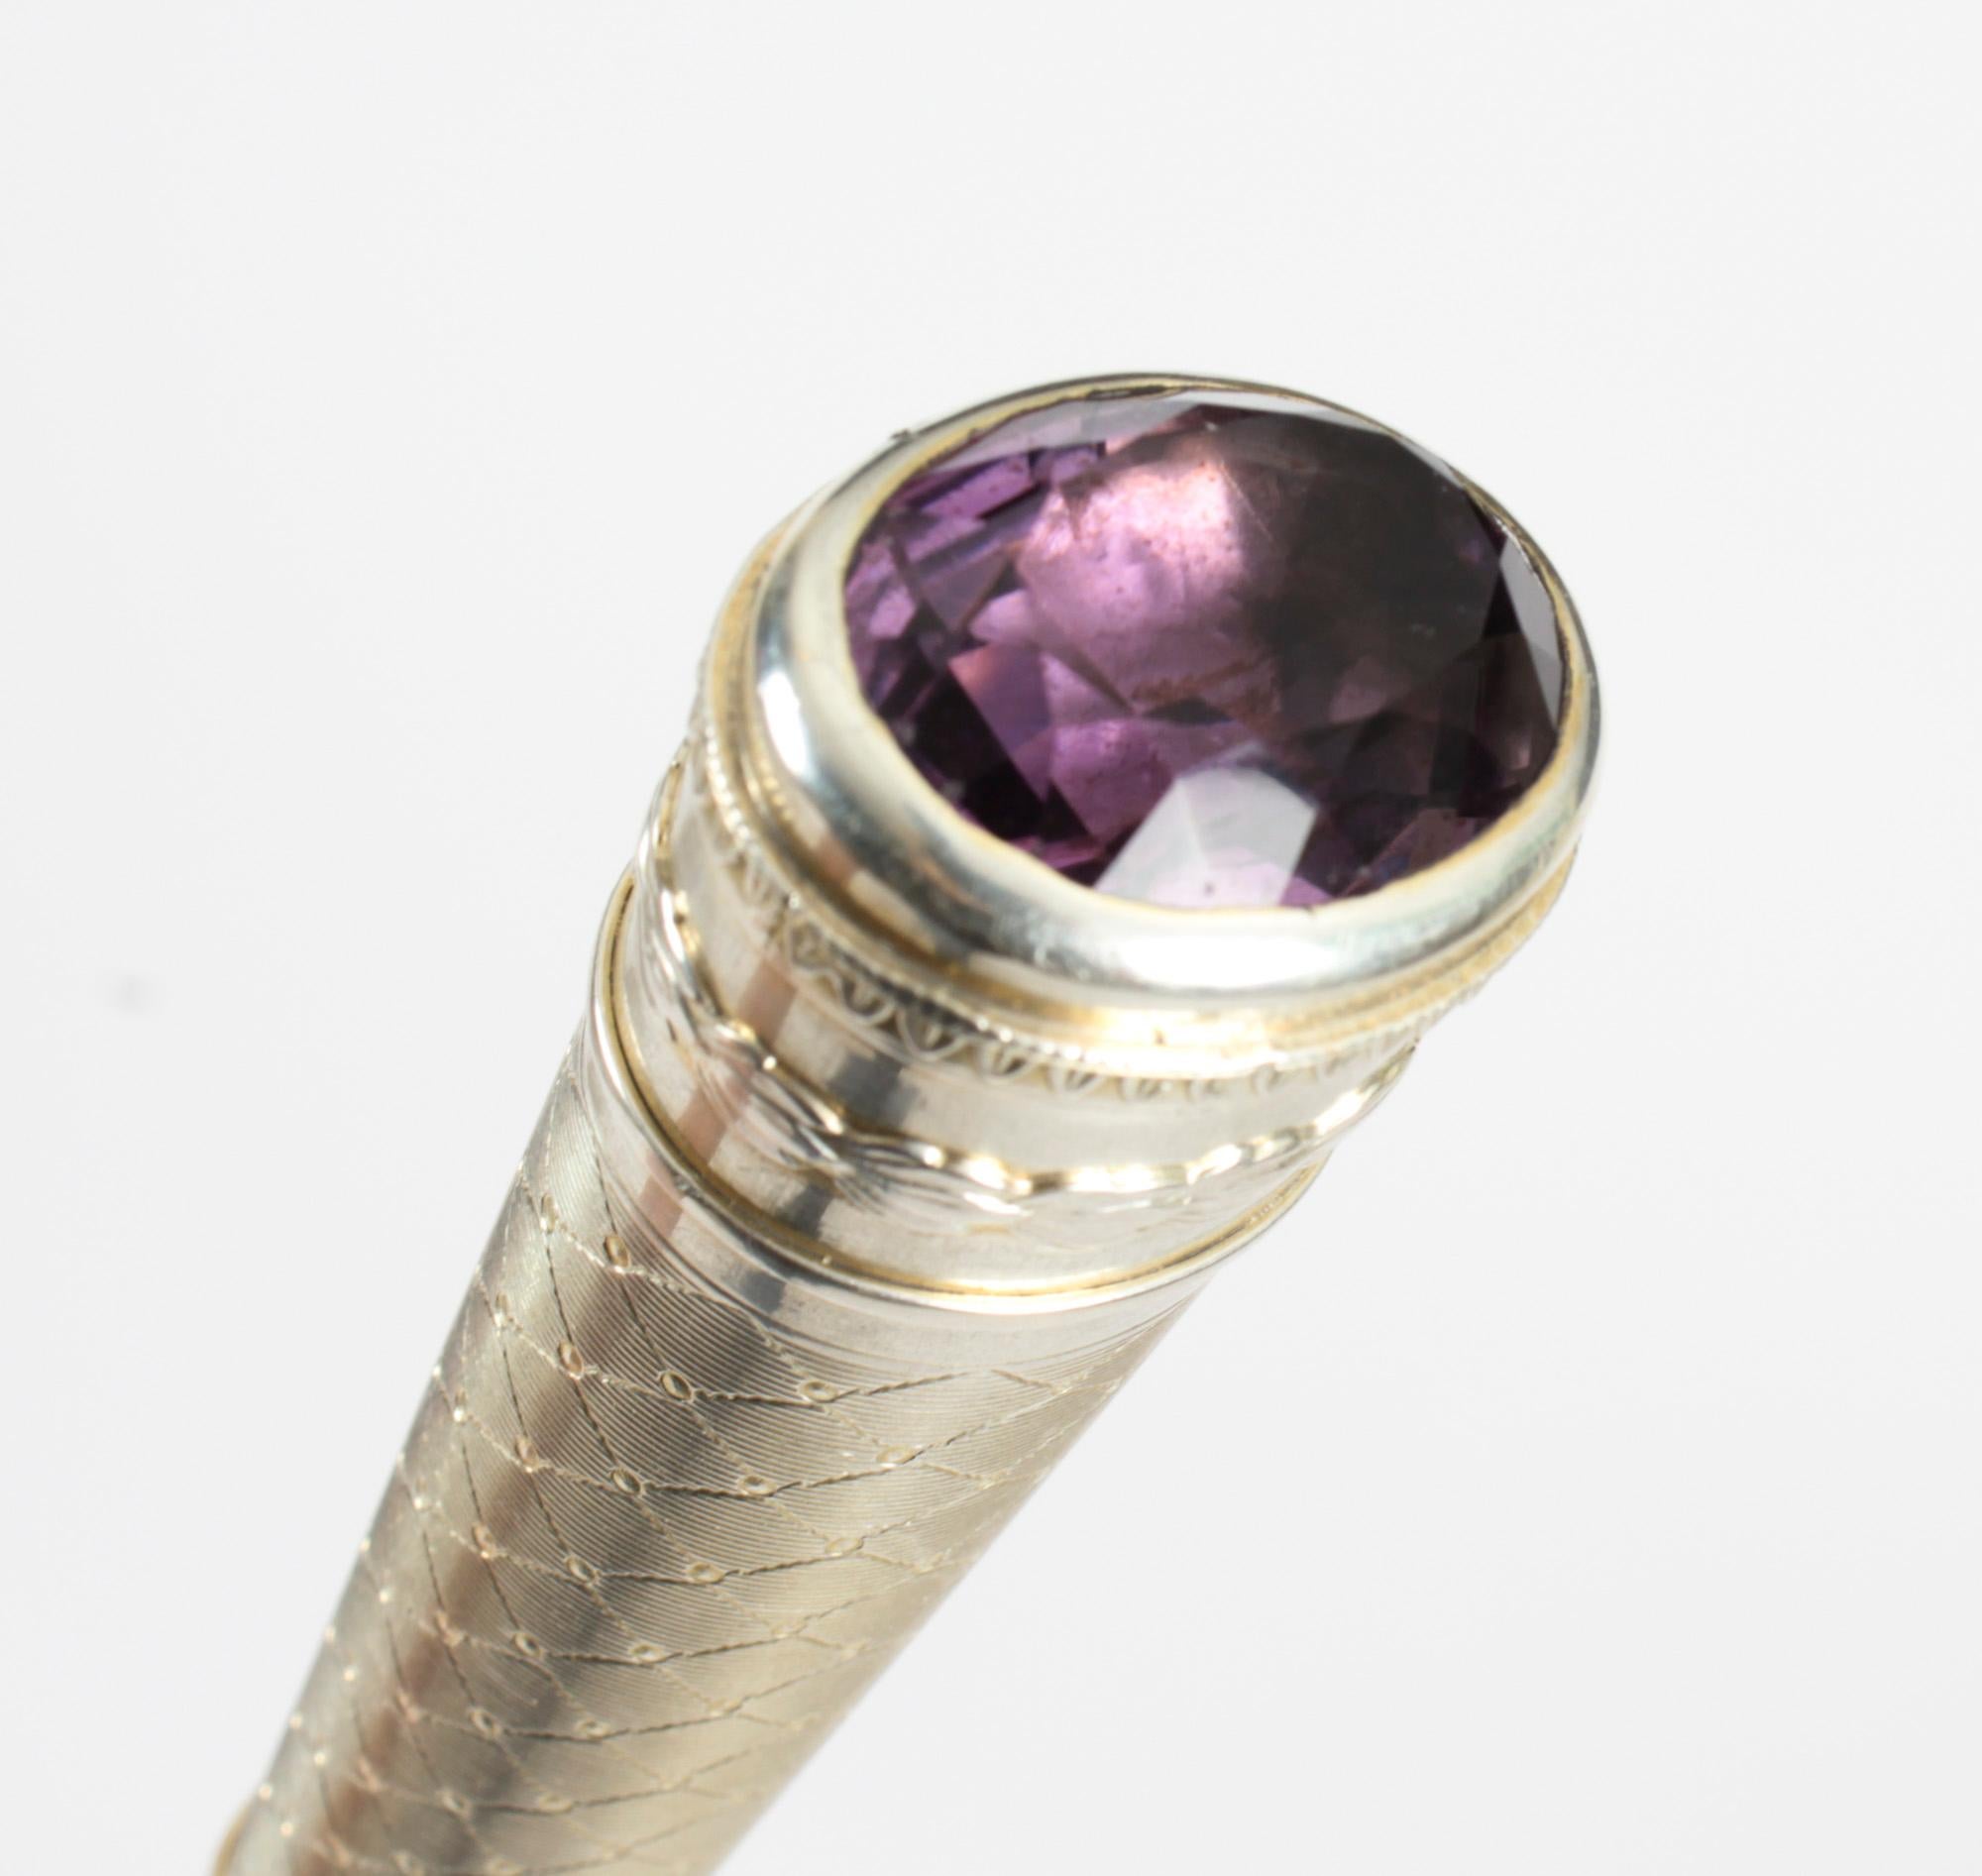 This is a superb Austrian neoclassical Revival Amethyst, Ebonised lady's walking stick, hallmarked George Adam Schied, Vienna, and dated 1900.
 
This decorative walking cane features a tapering handle surmounted with a large amethyst pommel. The